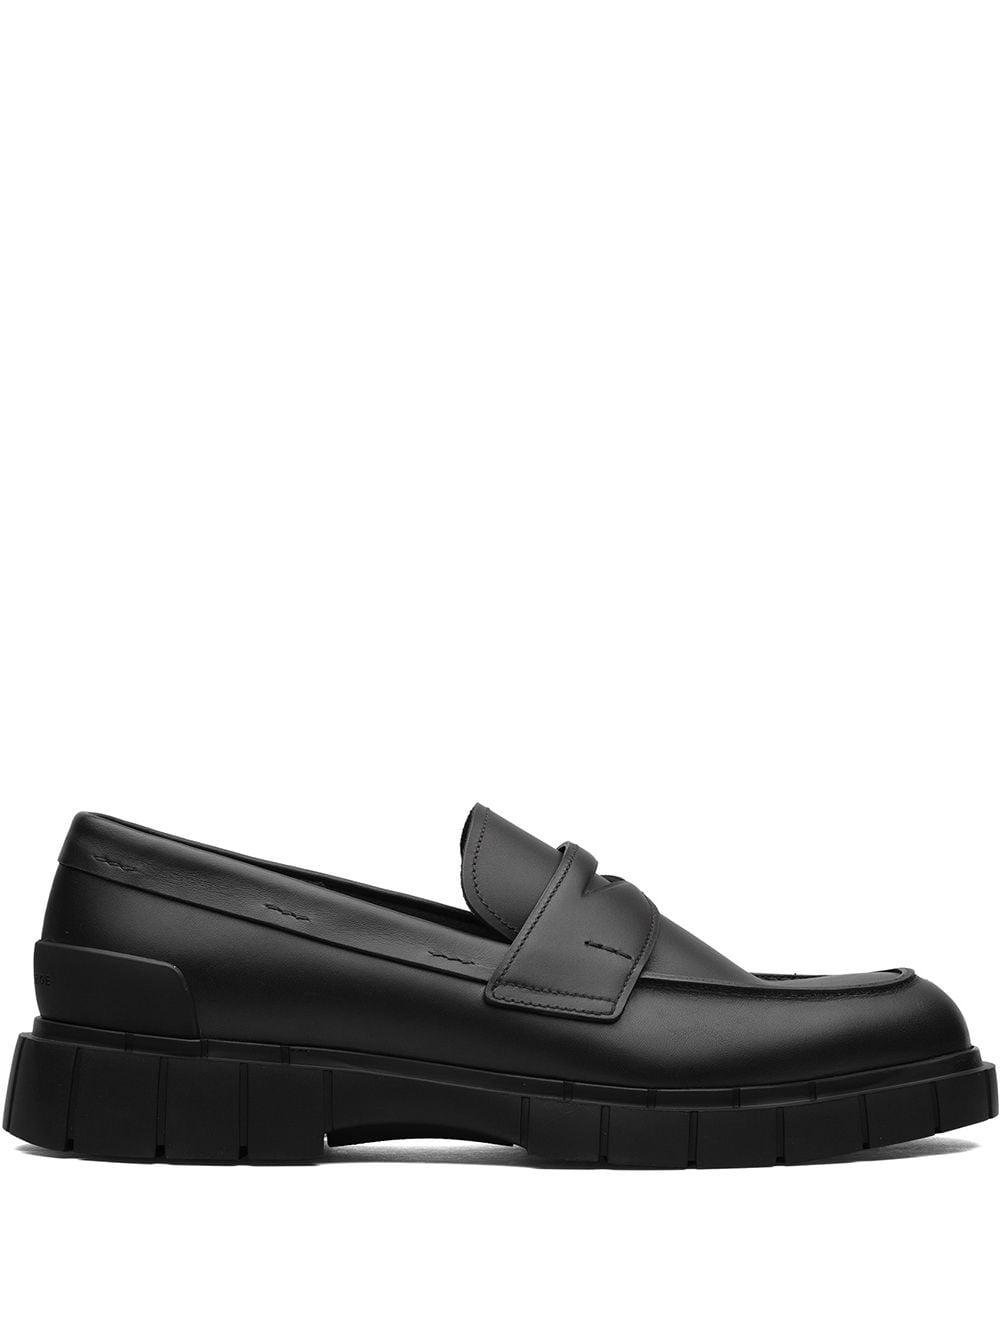 slip-on calf leather loafers by CAR SHOE